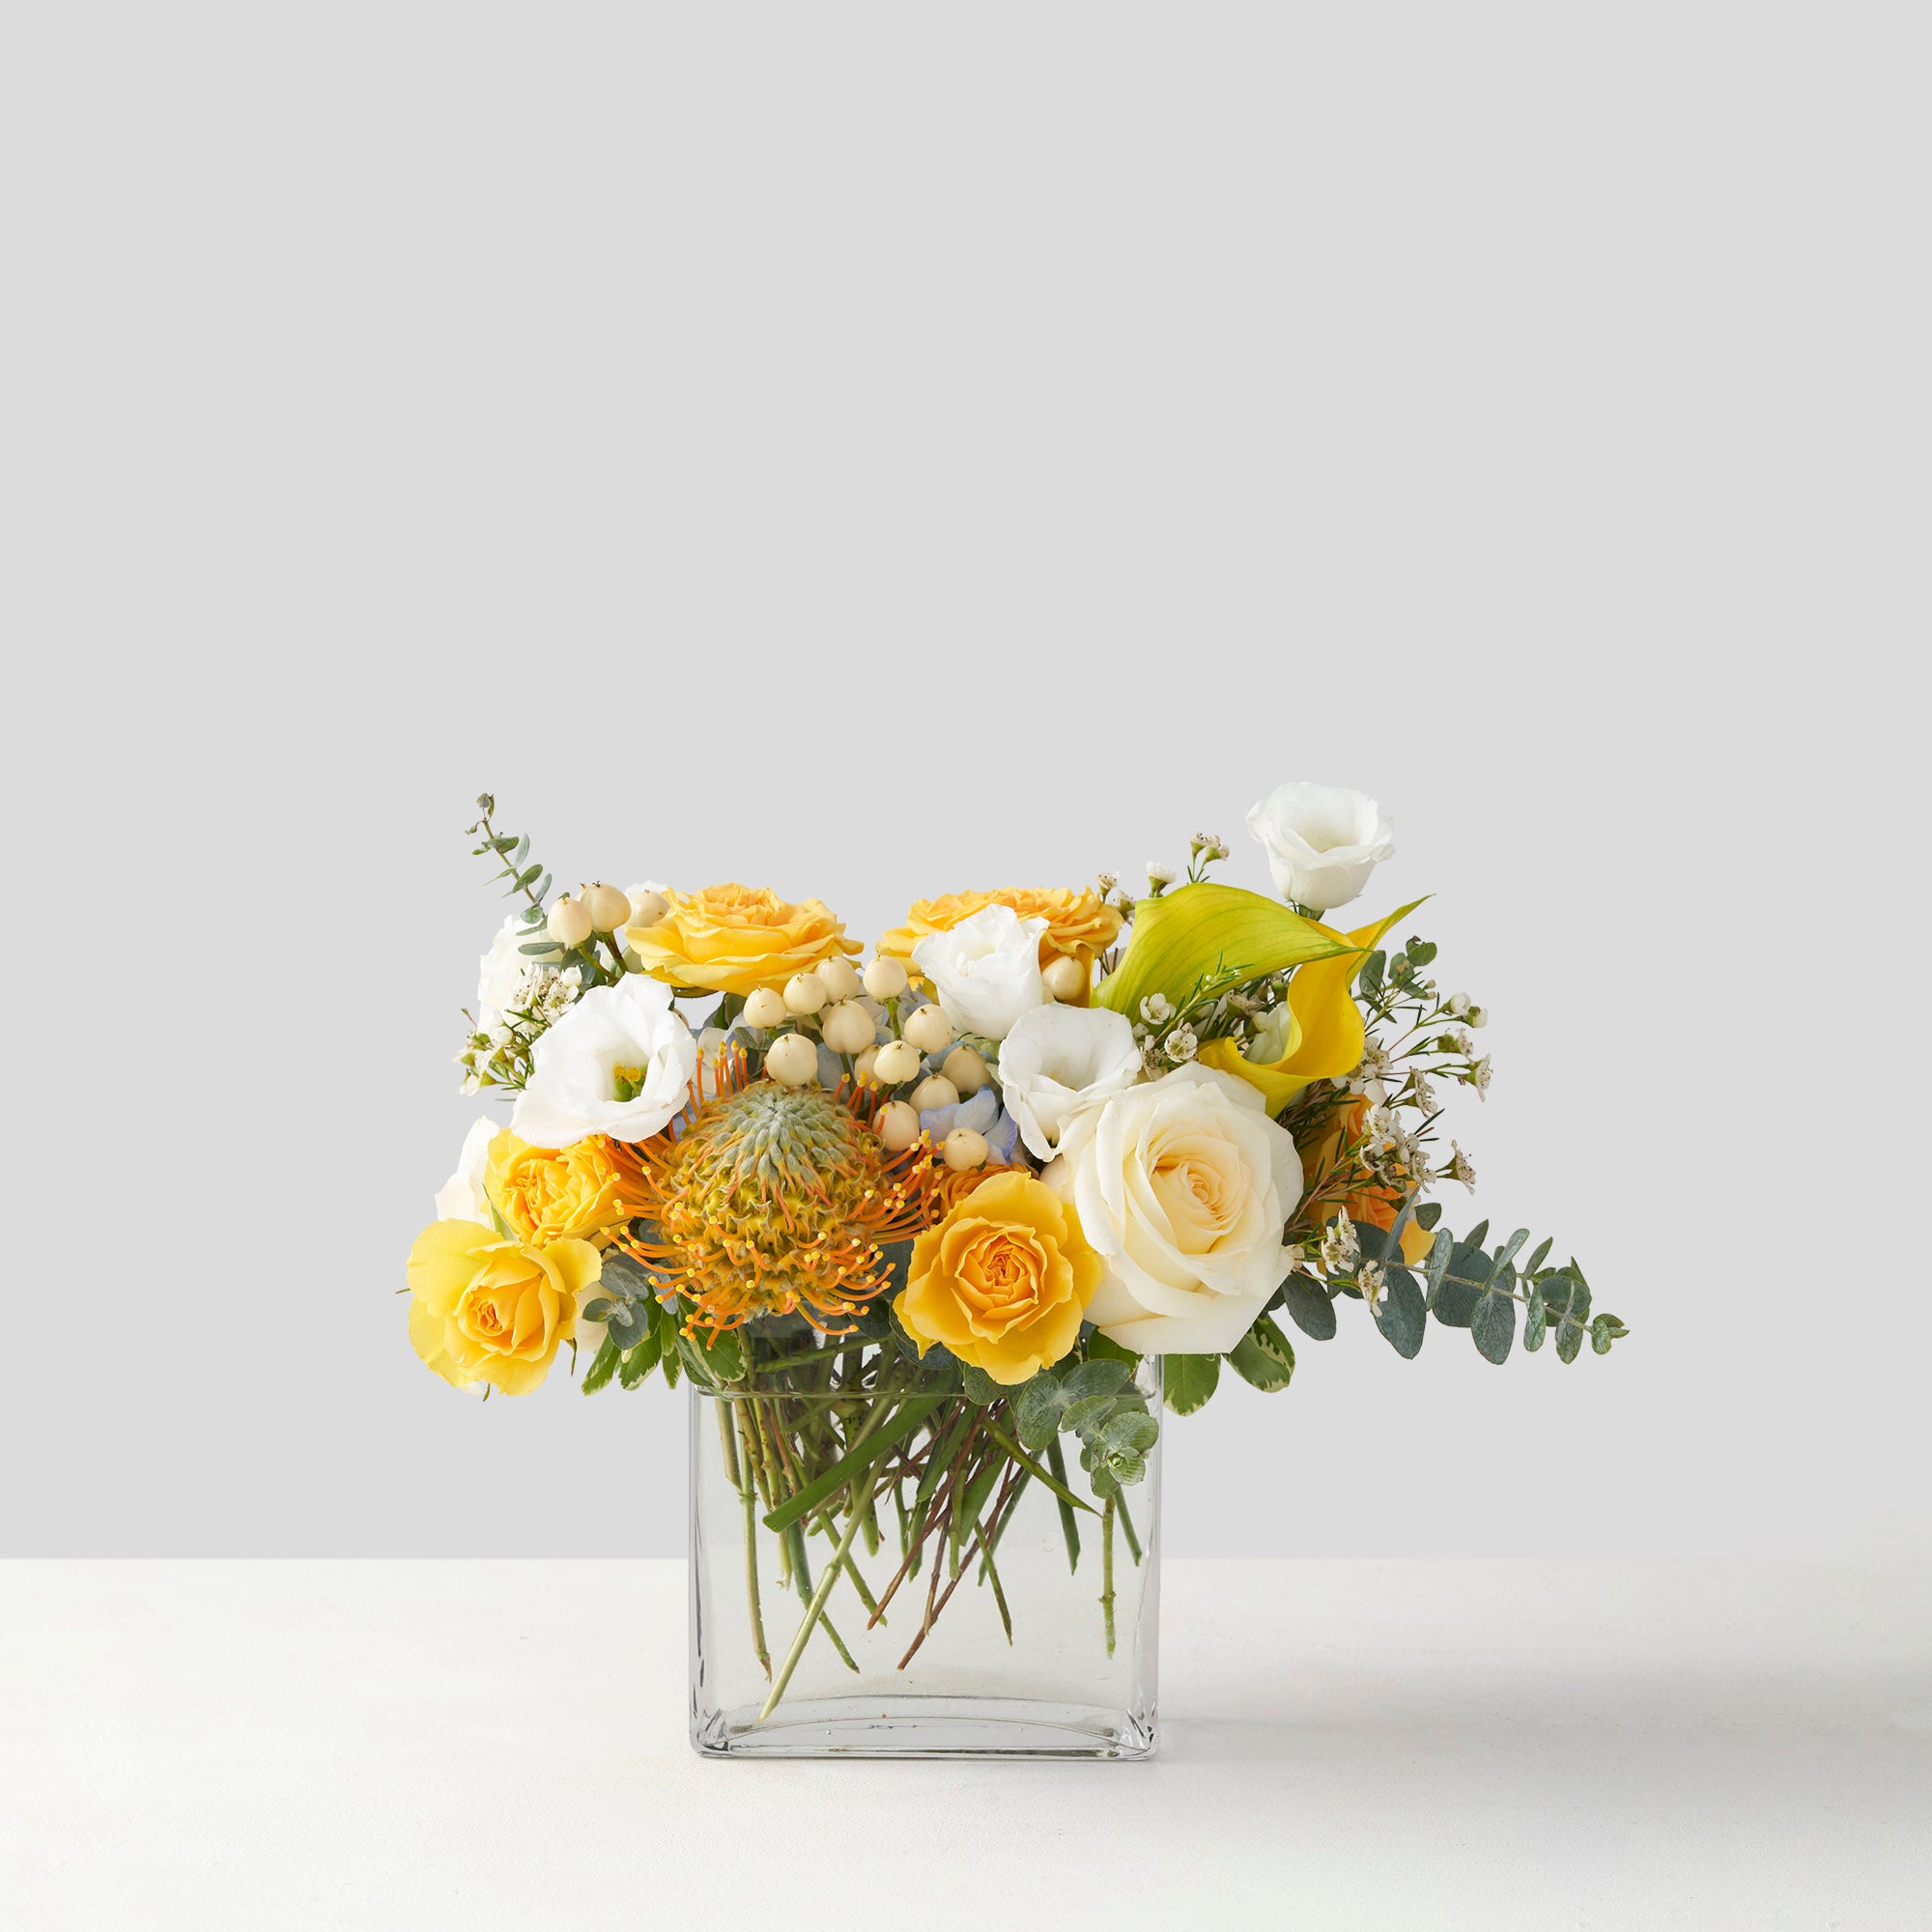 Rectangular glass vase with yellow proteal, yellow and cream roses, yellow calls, white lisianthus, and euclyptus.